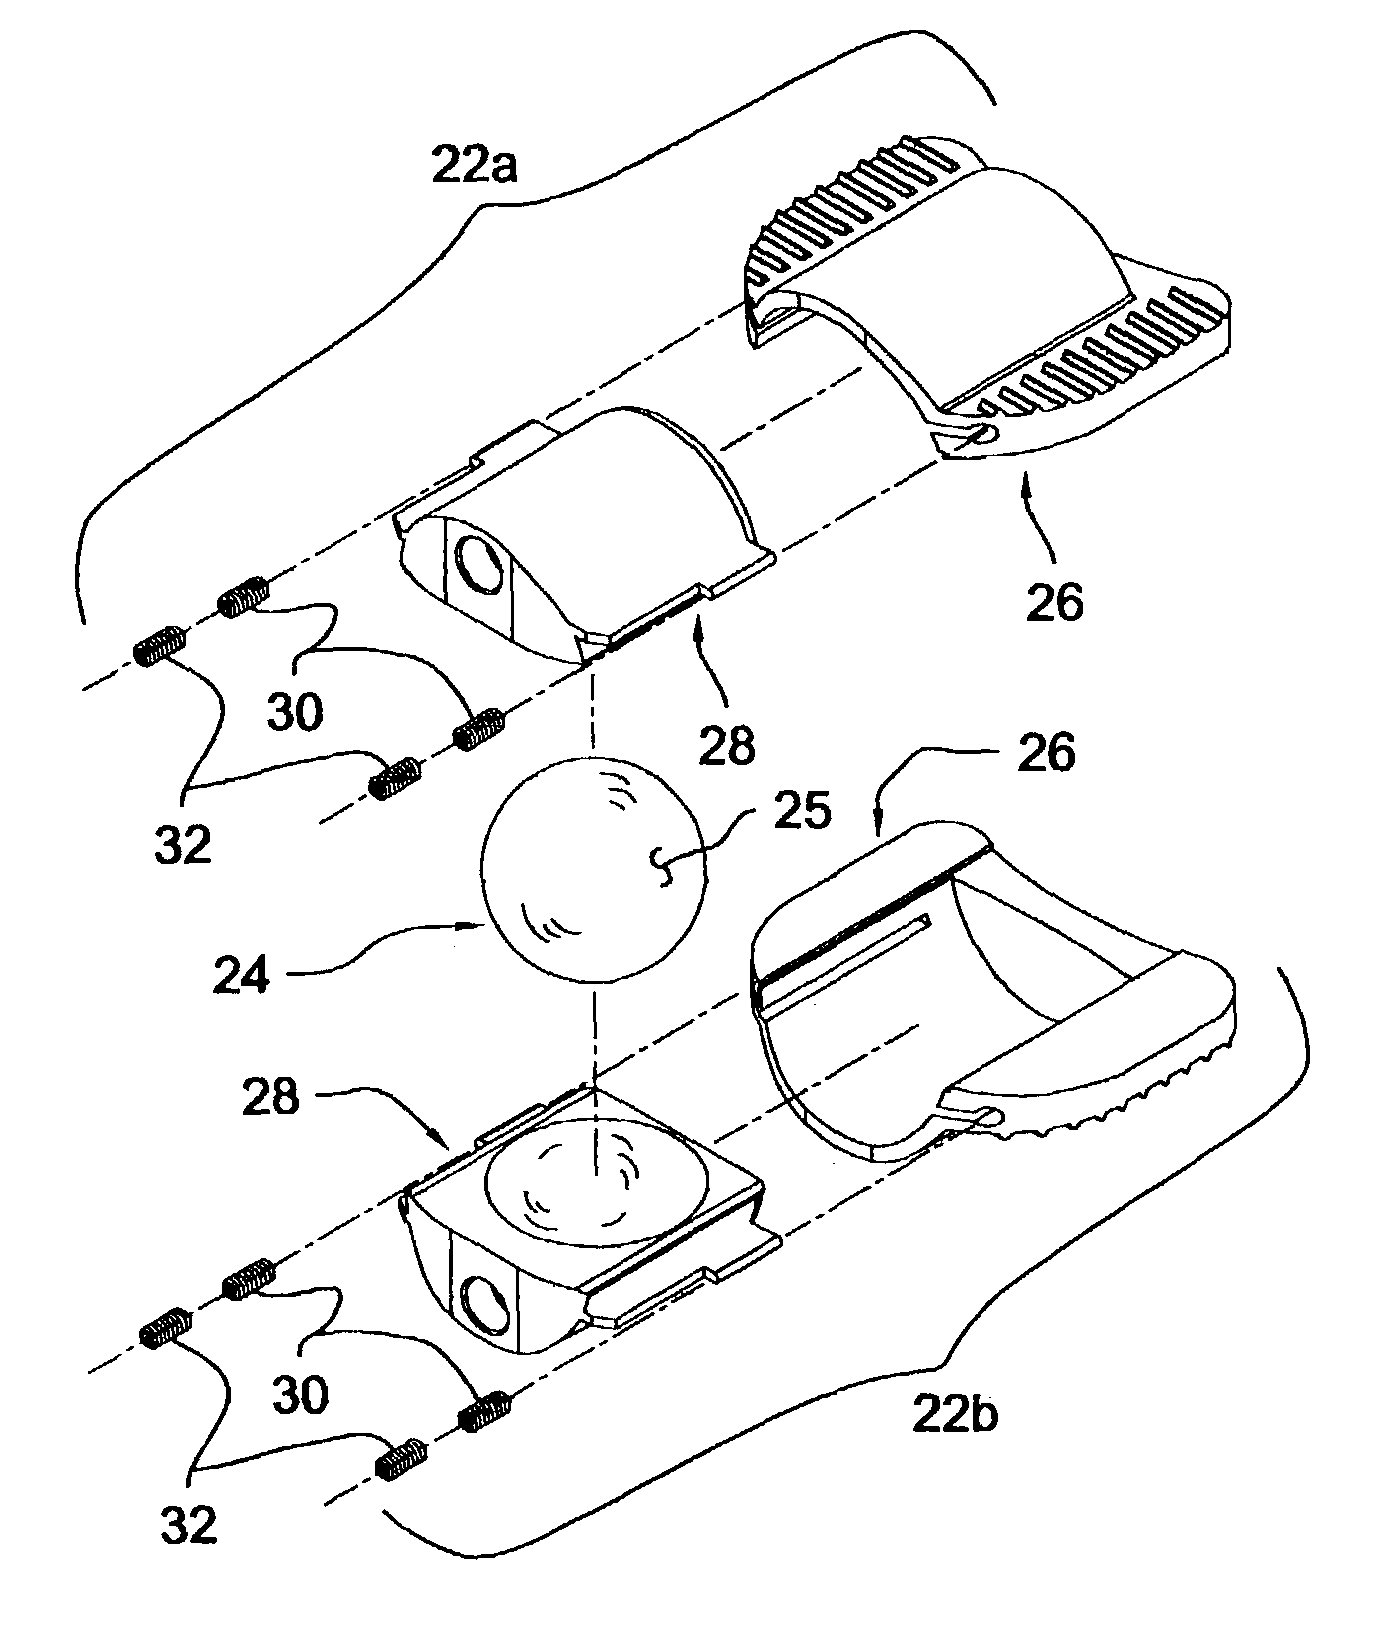 Articular disc prosthesis and method for implanting the same